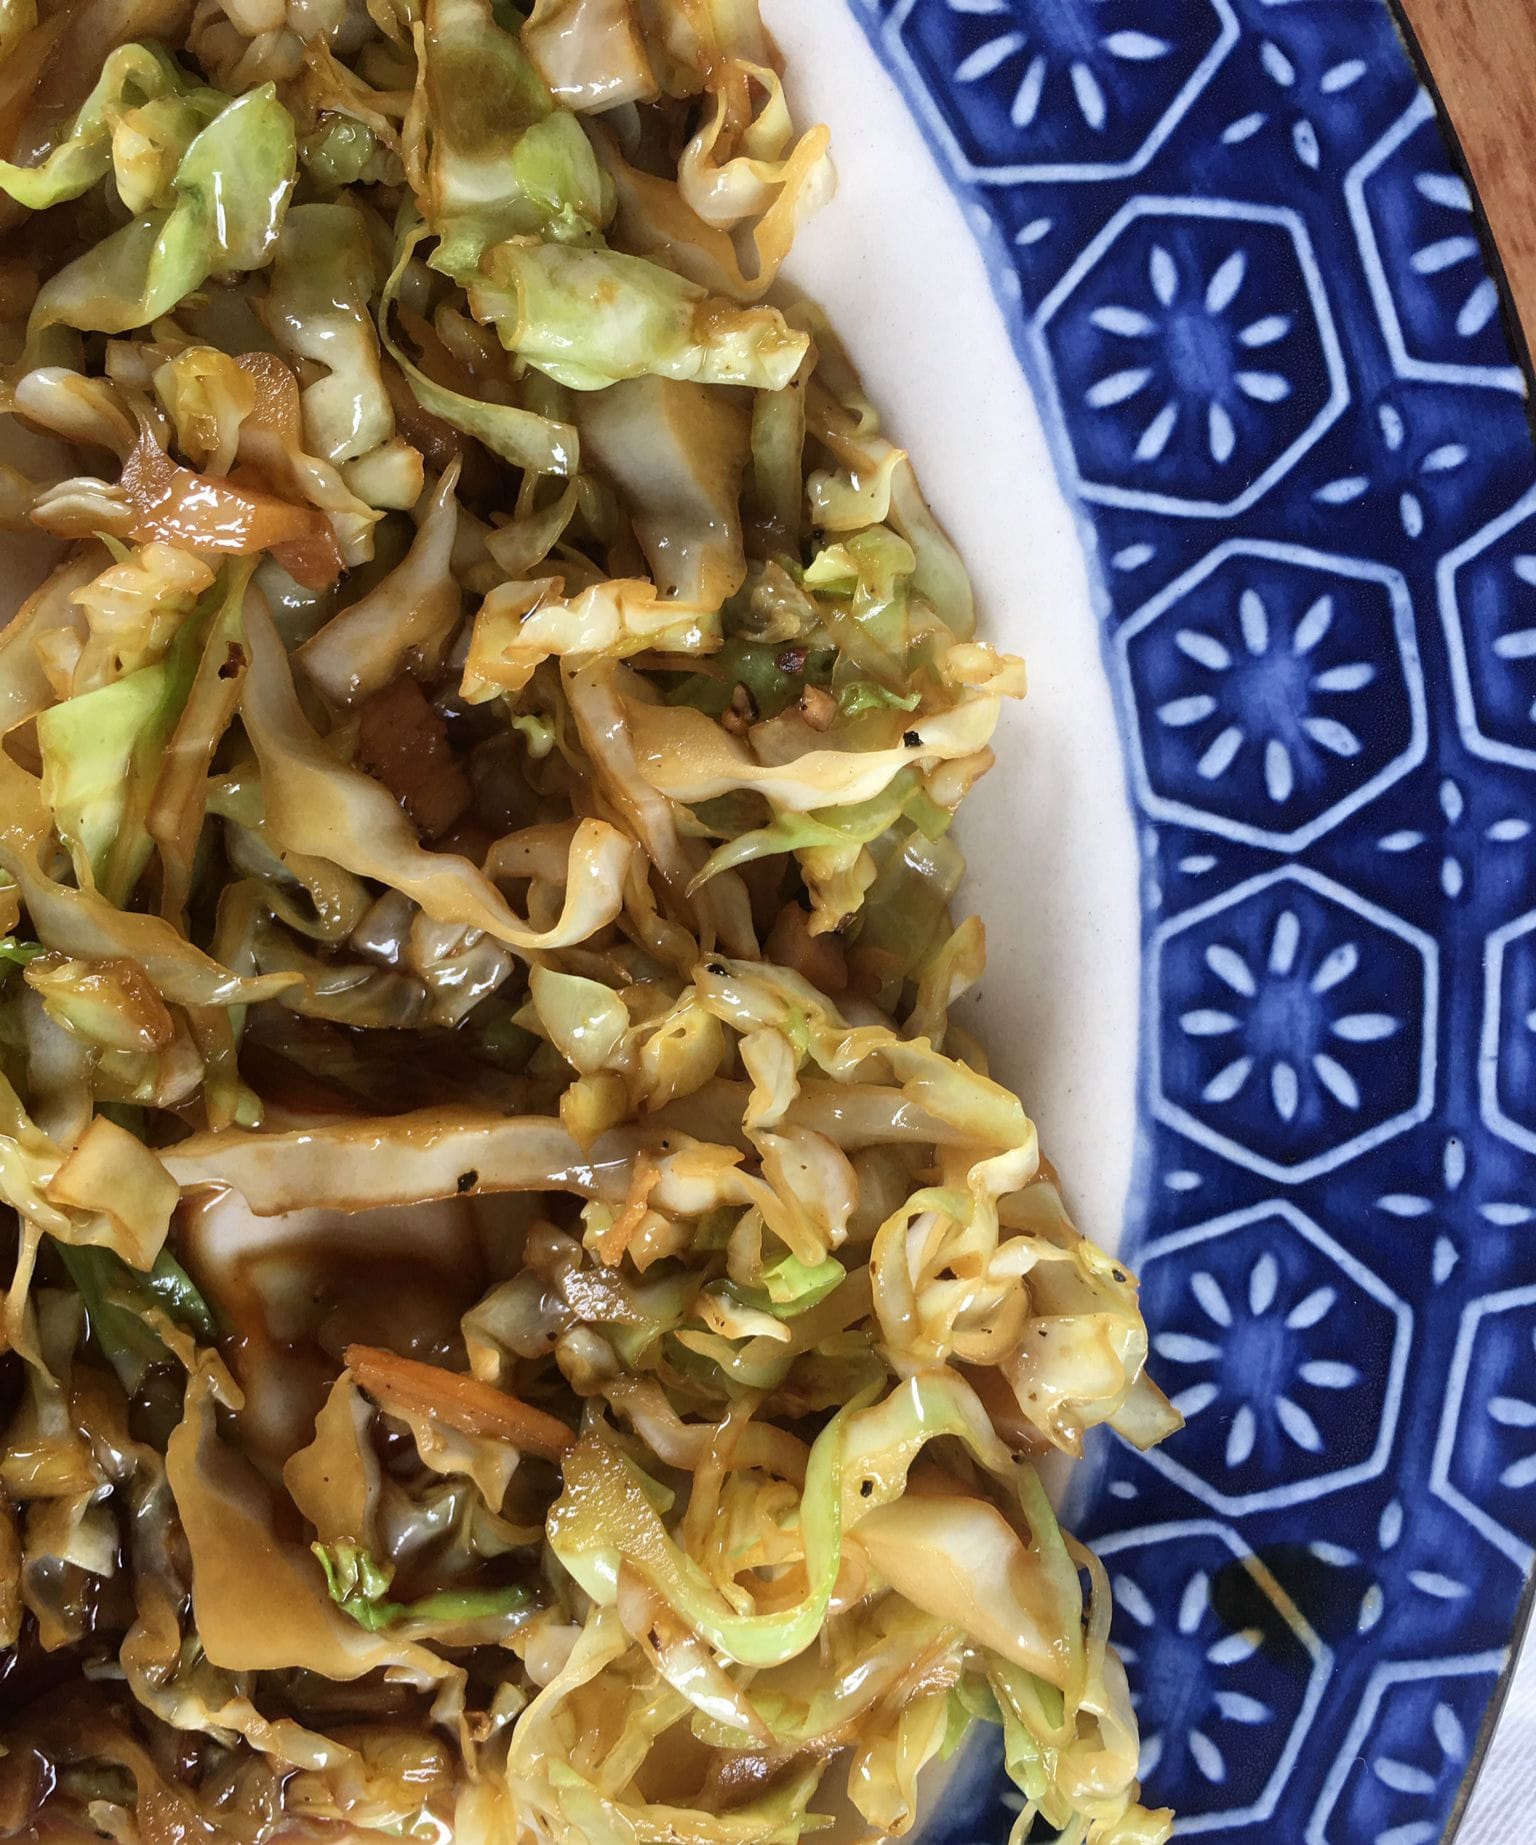 Cabbage Stir Fry Recipe With Garlic, Ginger And Soy Sauce